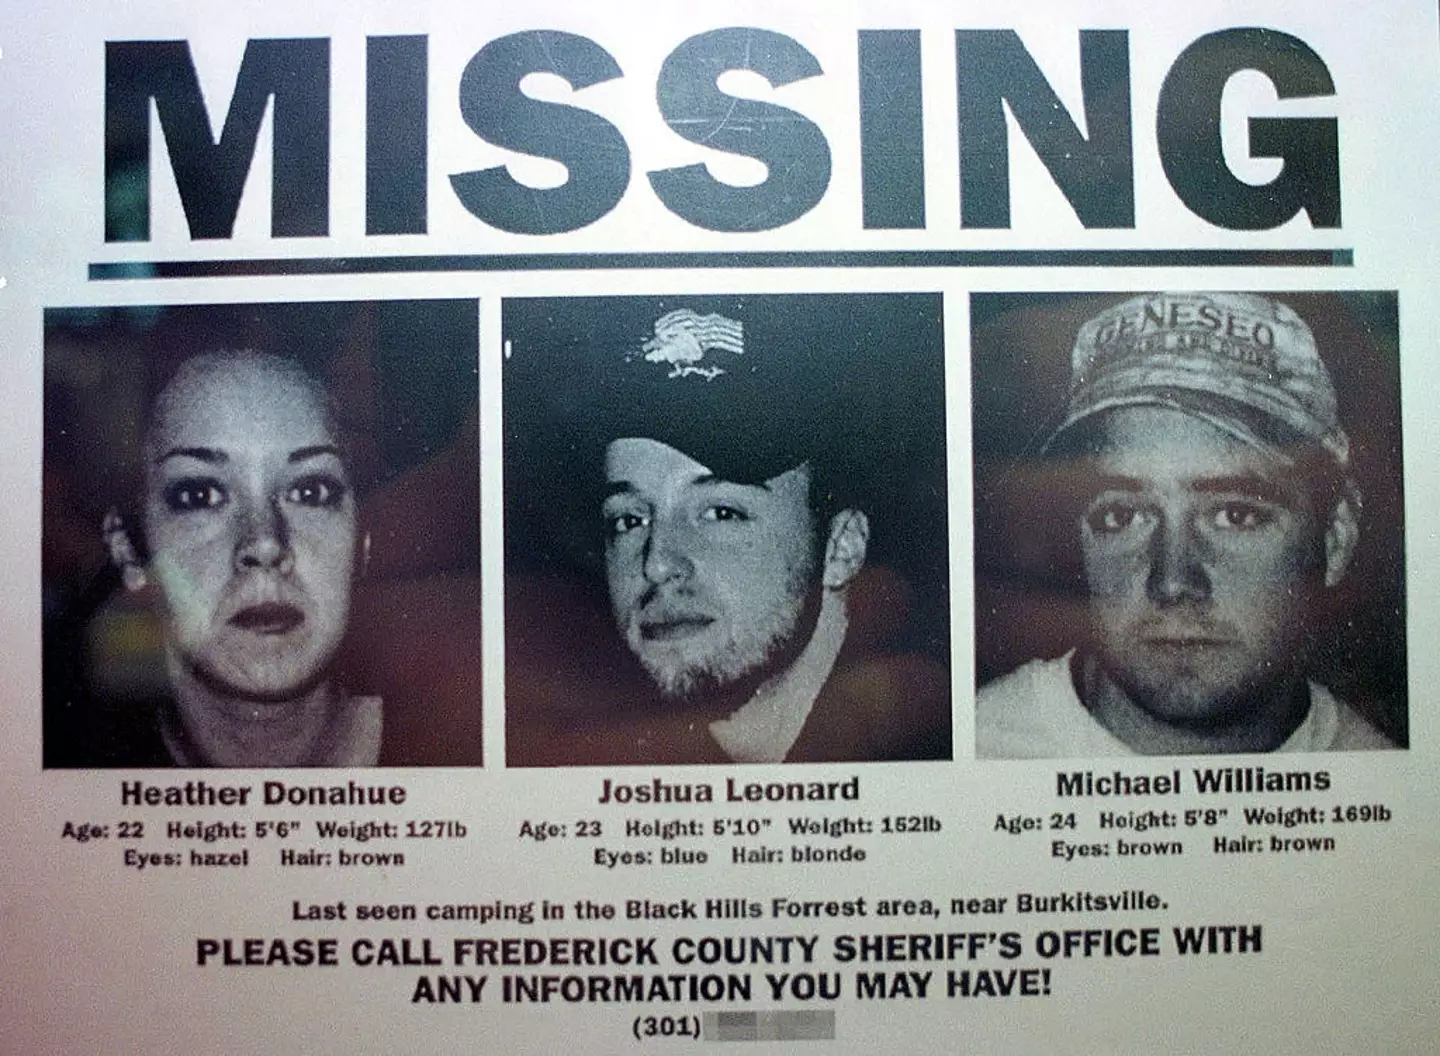 Missing posters for the cast were put up. (William Thomas Cain)